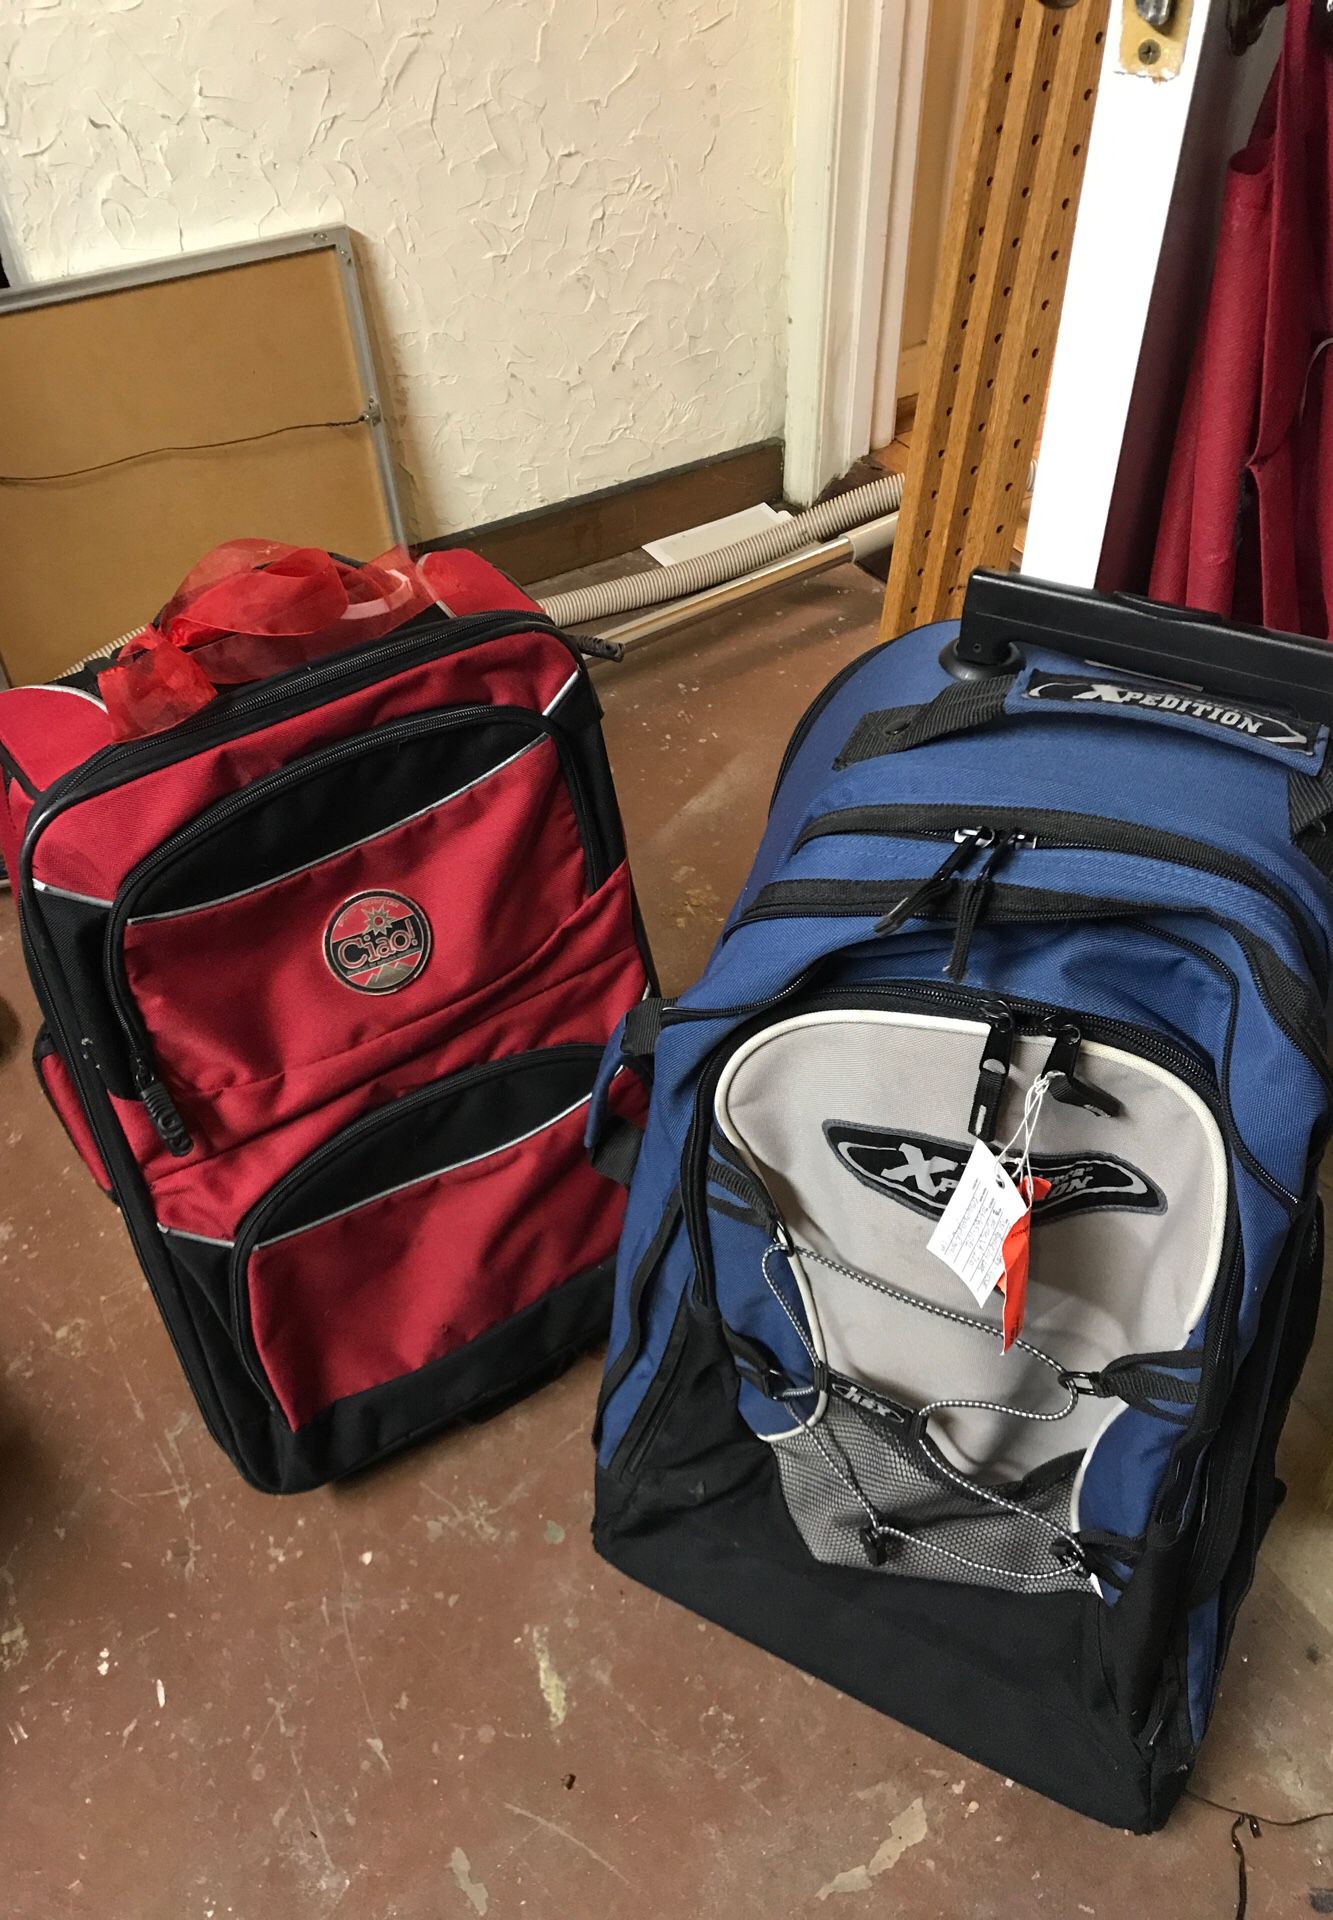 Travel bags with wheels